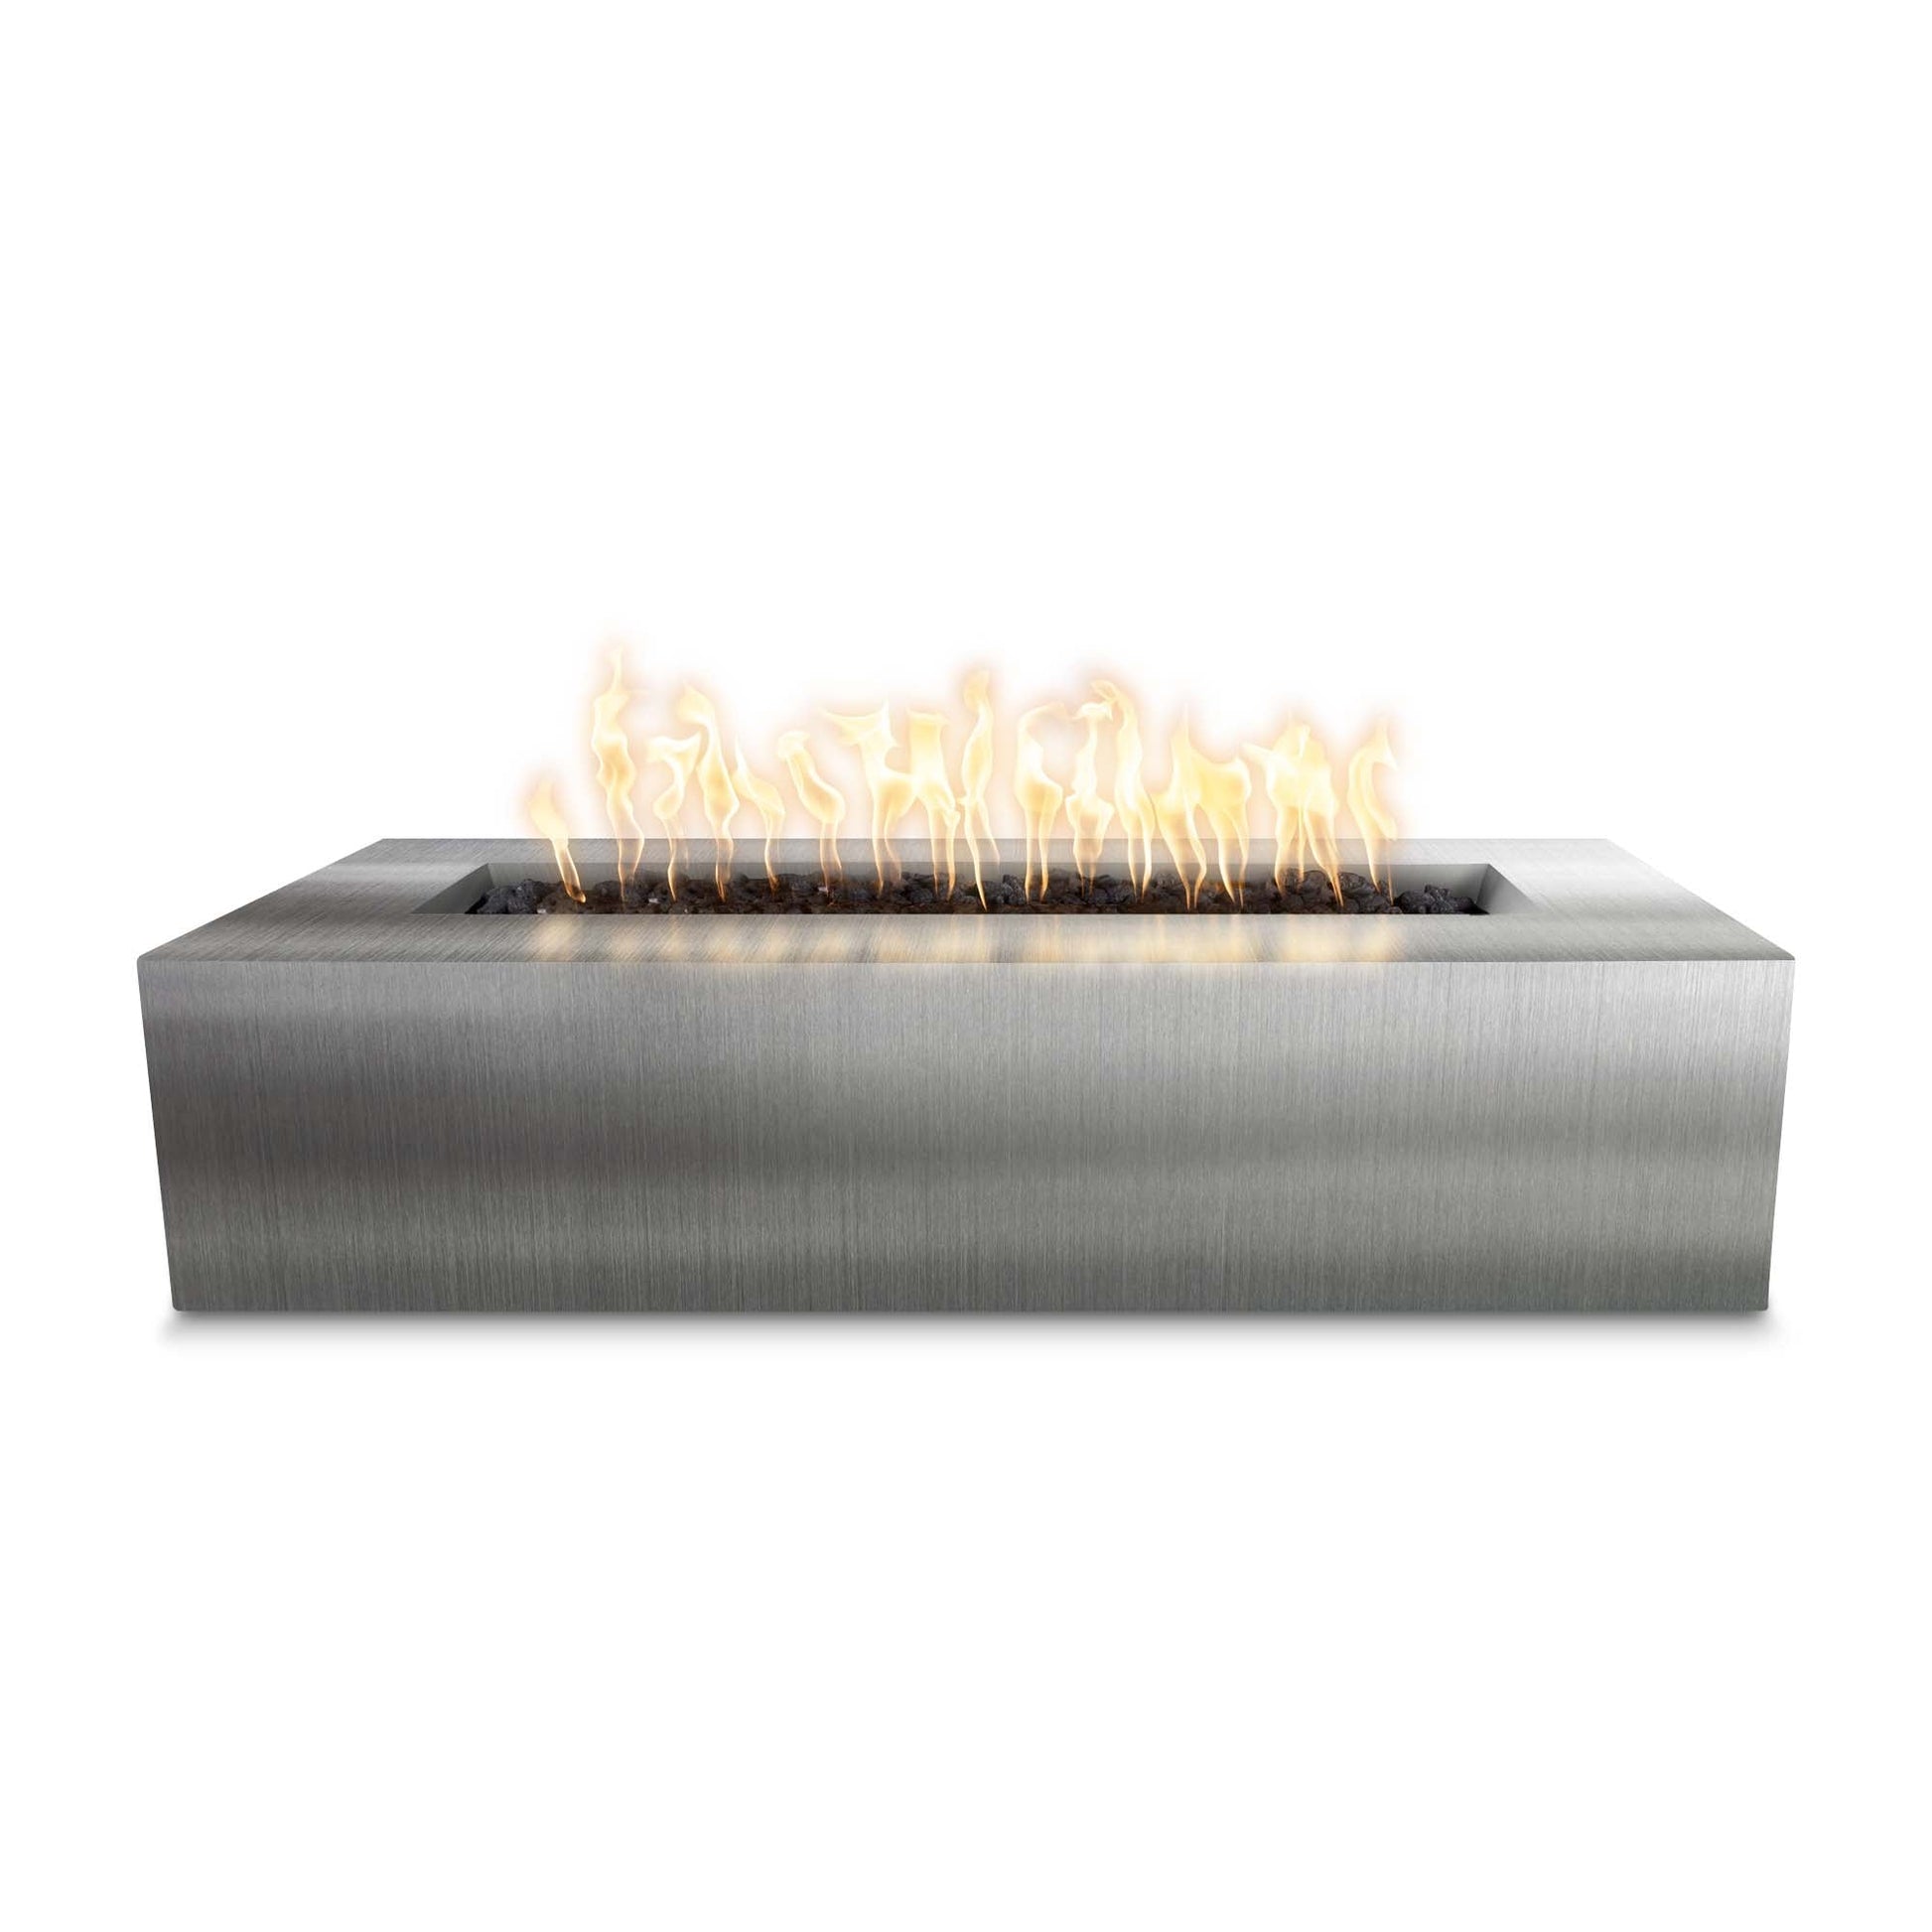 The Outdoor Plus Rectangular Regal 60" Hammered Copper Natural Gas Fire Pit with Flame Sense with Spark Ignition